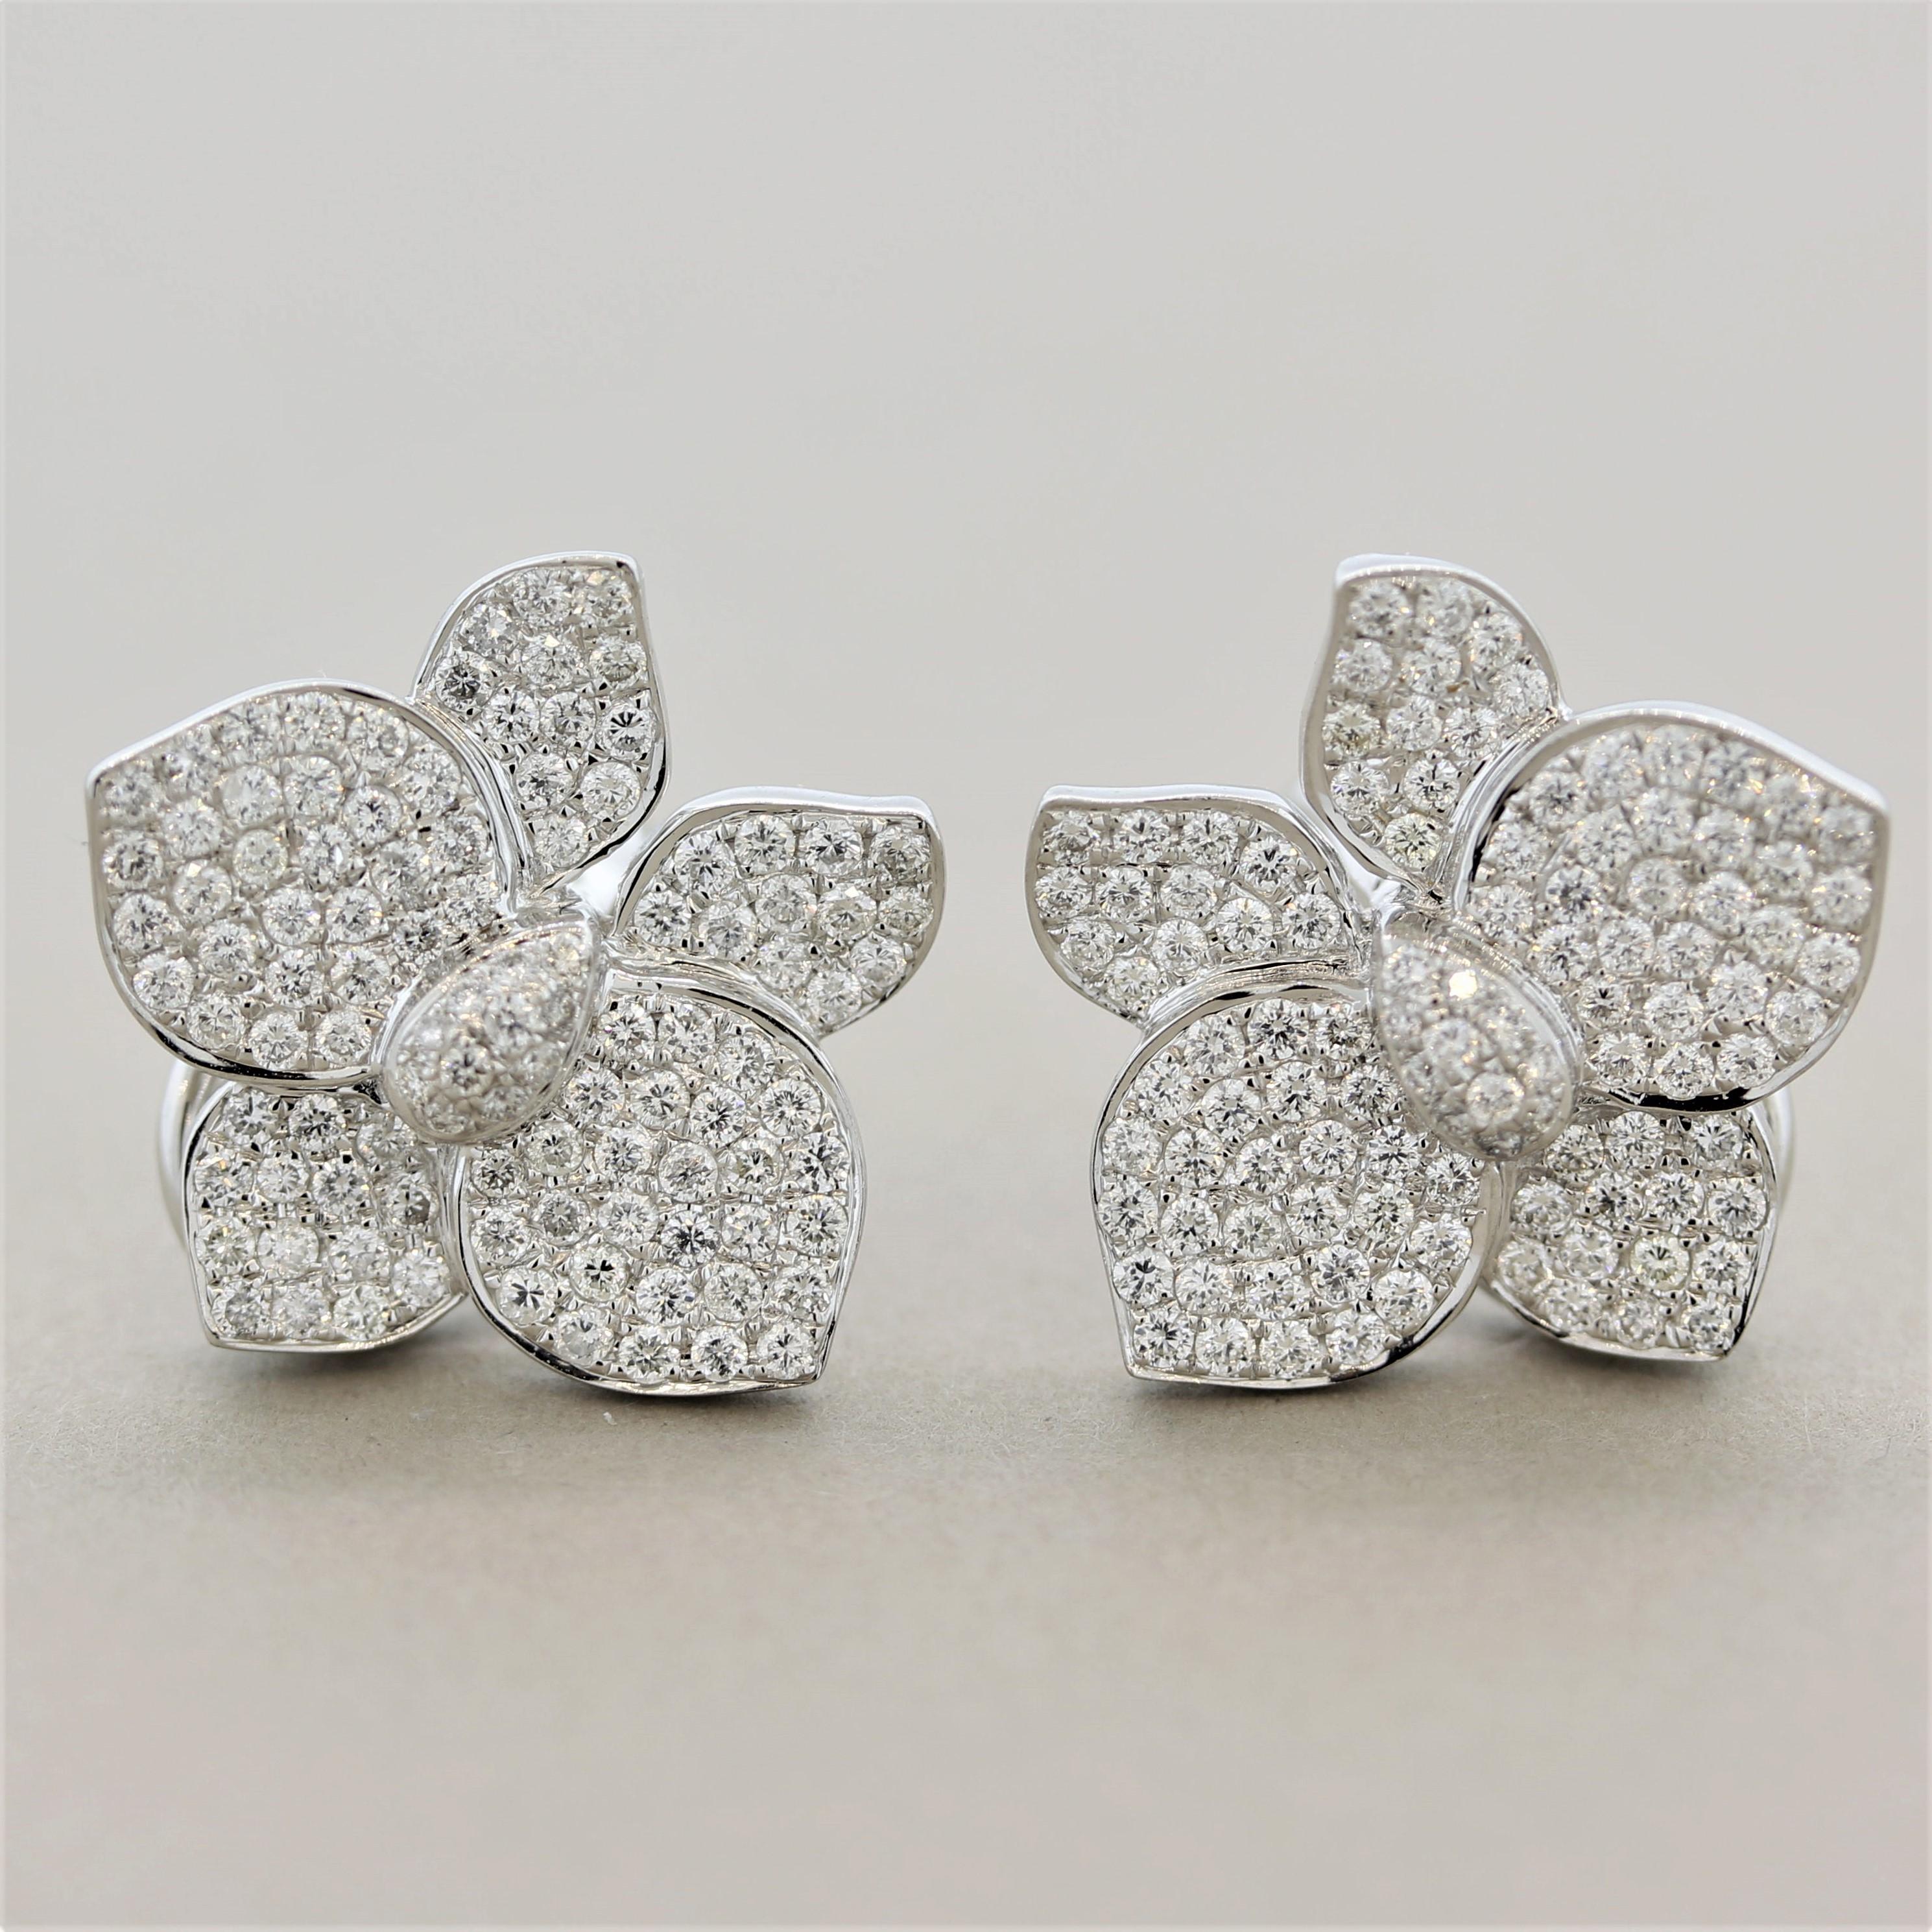 A sweet pair of earrings featuring 1.71 carats of fine round brilliant-cut diamonds full of like and sparkle. They are pave-set and completely cover the earrings designed as a flower in full blossom. Made in 18k white gold and ready to be worn and